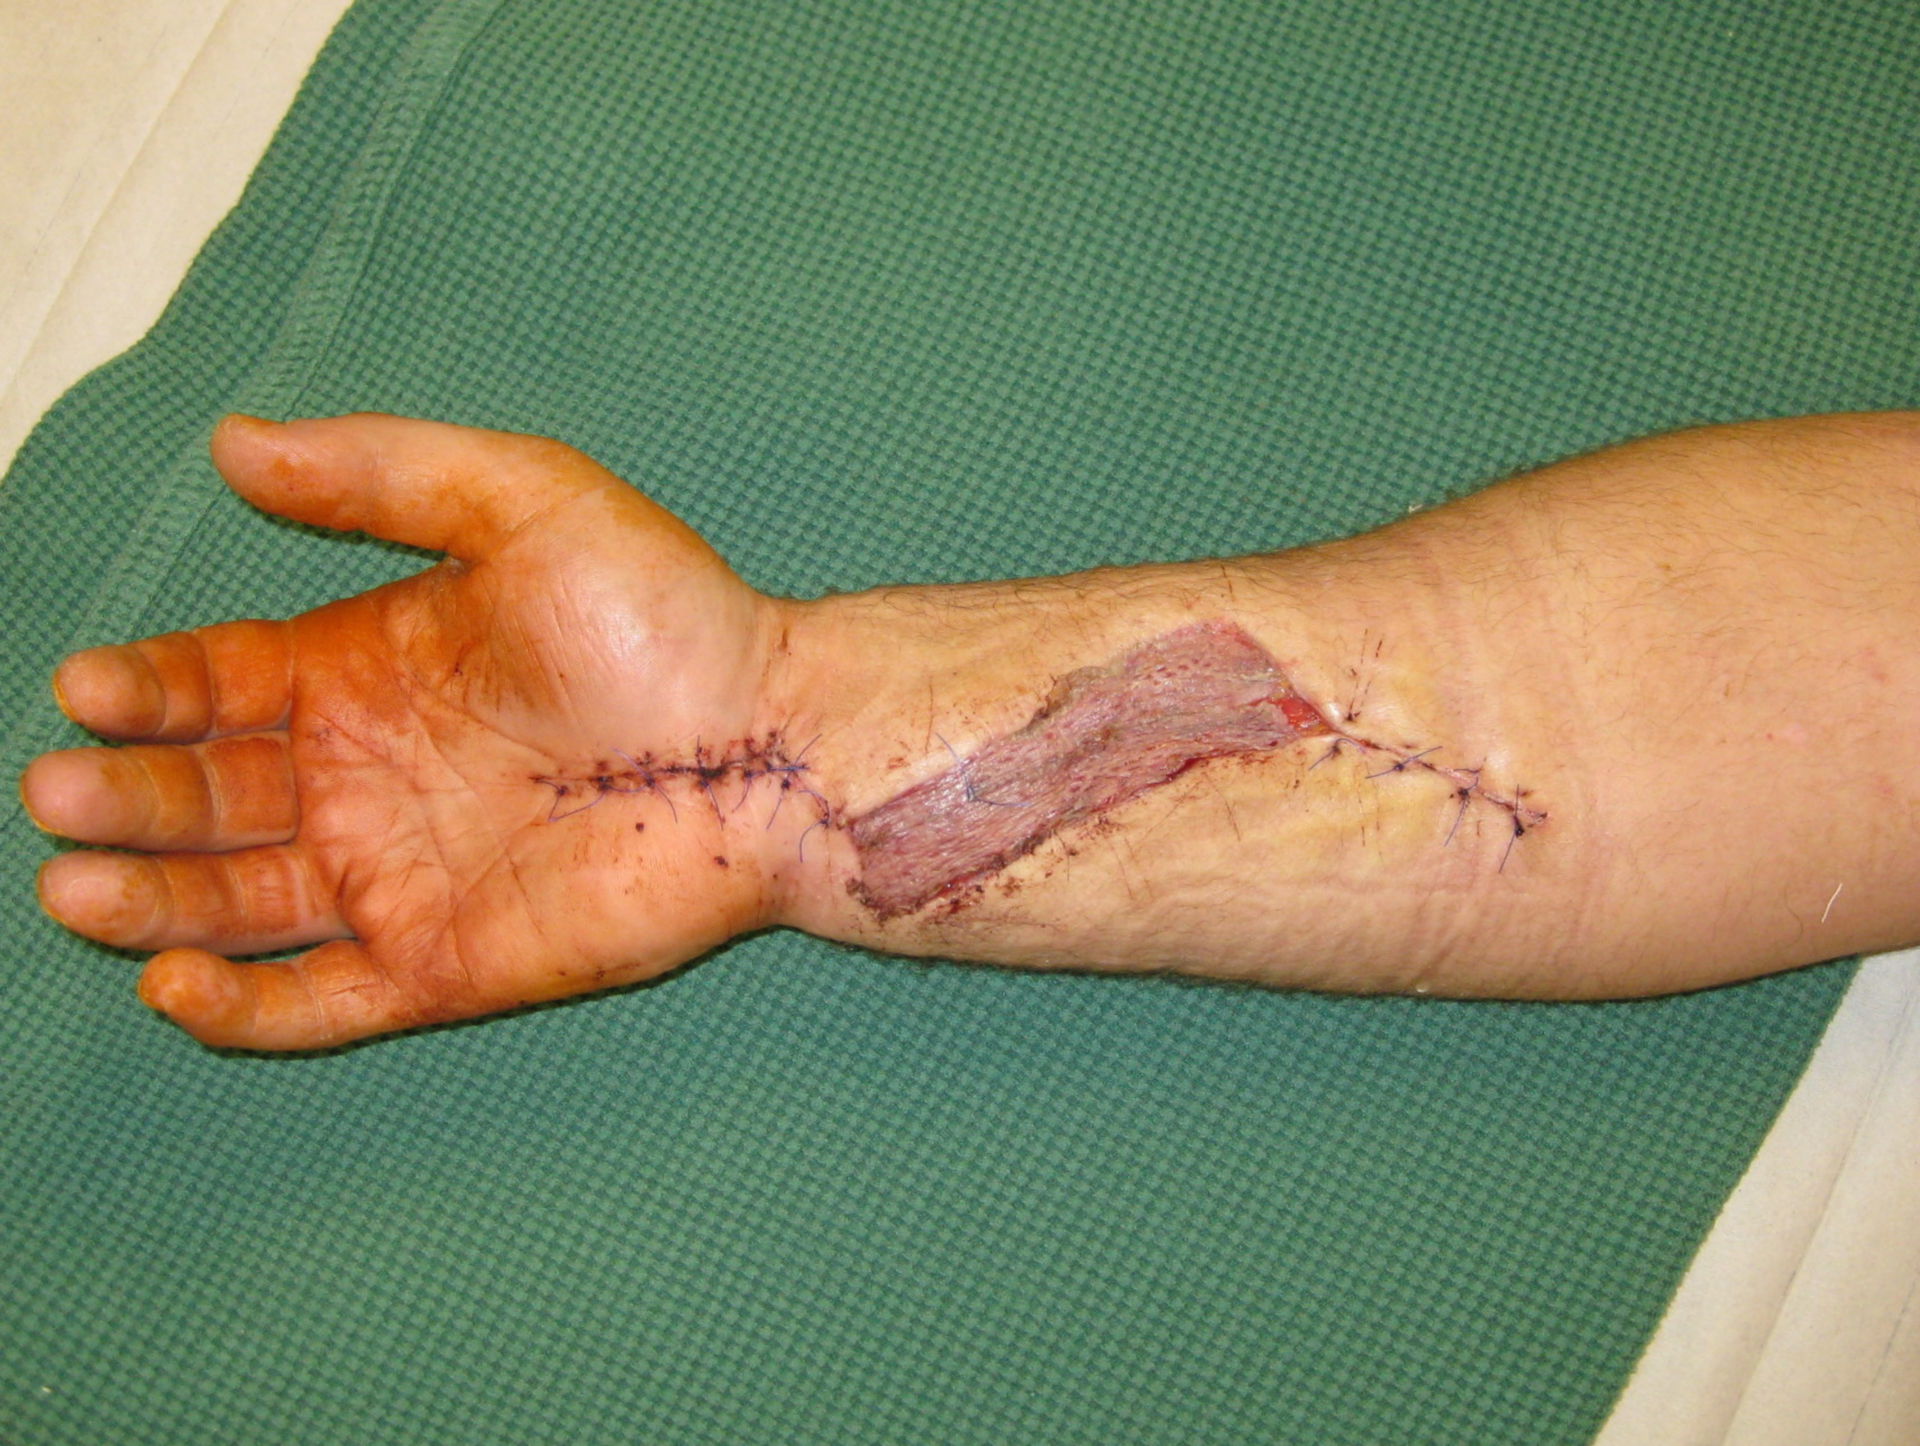 Acute ischemia of the fingers after unintentional intra-arterial injection of flunitrazepam 3 weeks after surgery